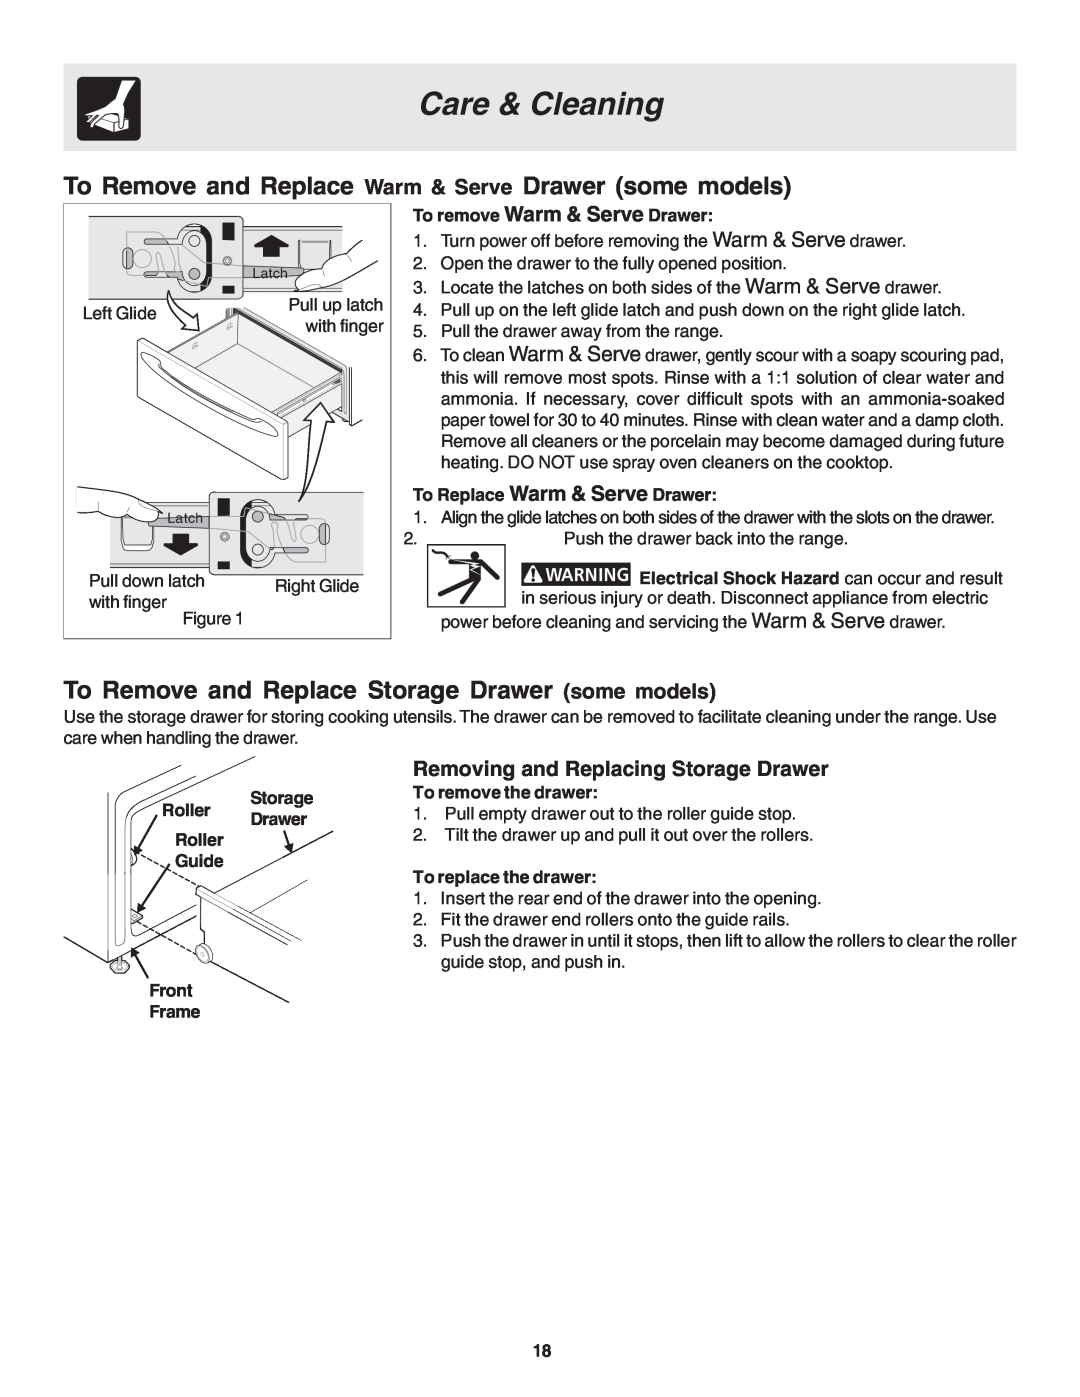 Frigidaire 318203873 manual Care & Cleaning, Removing and Replacing Storage Drawer, To remove Warm & Serve Drawer 